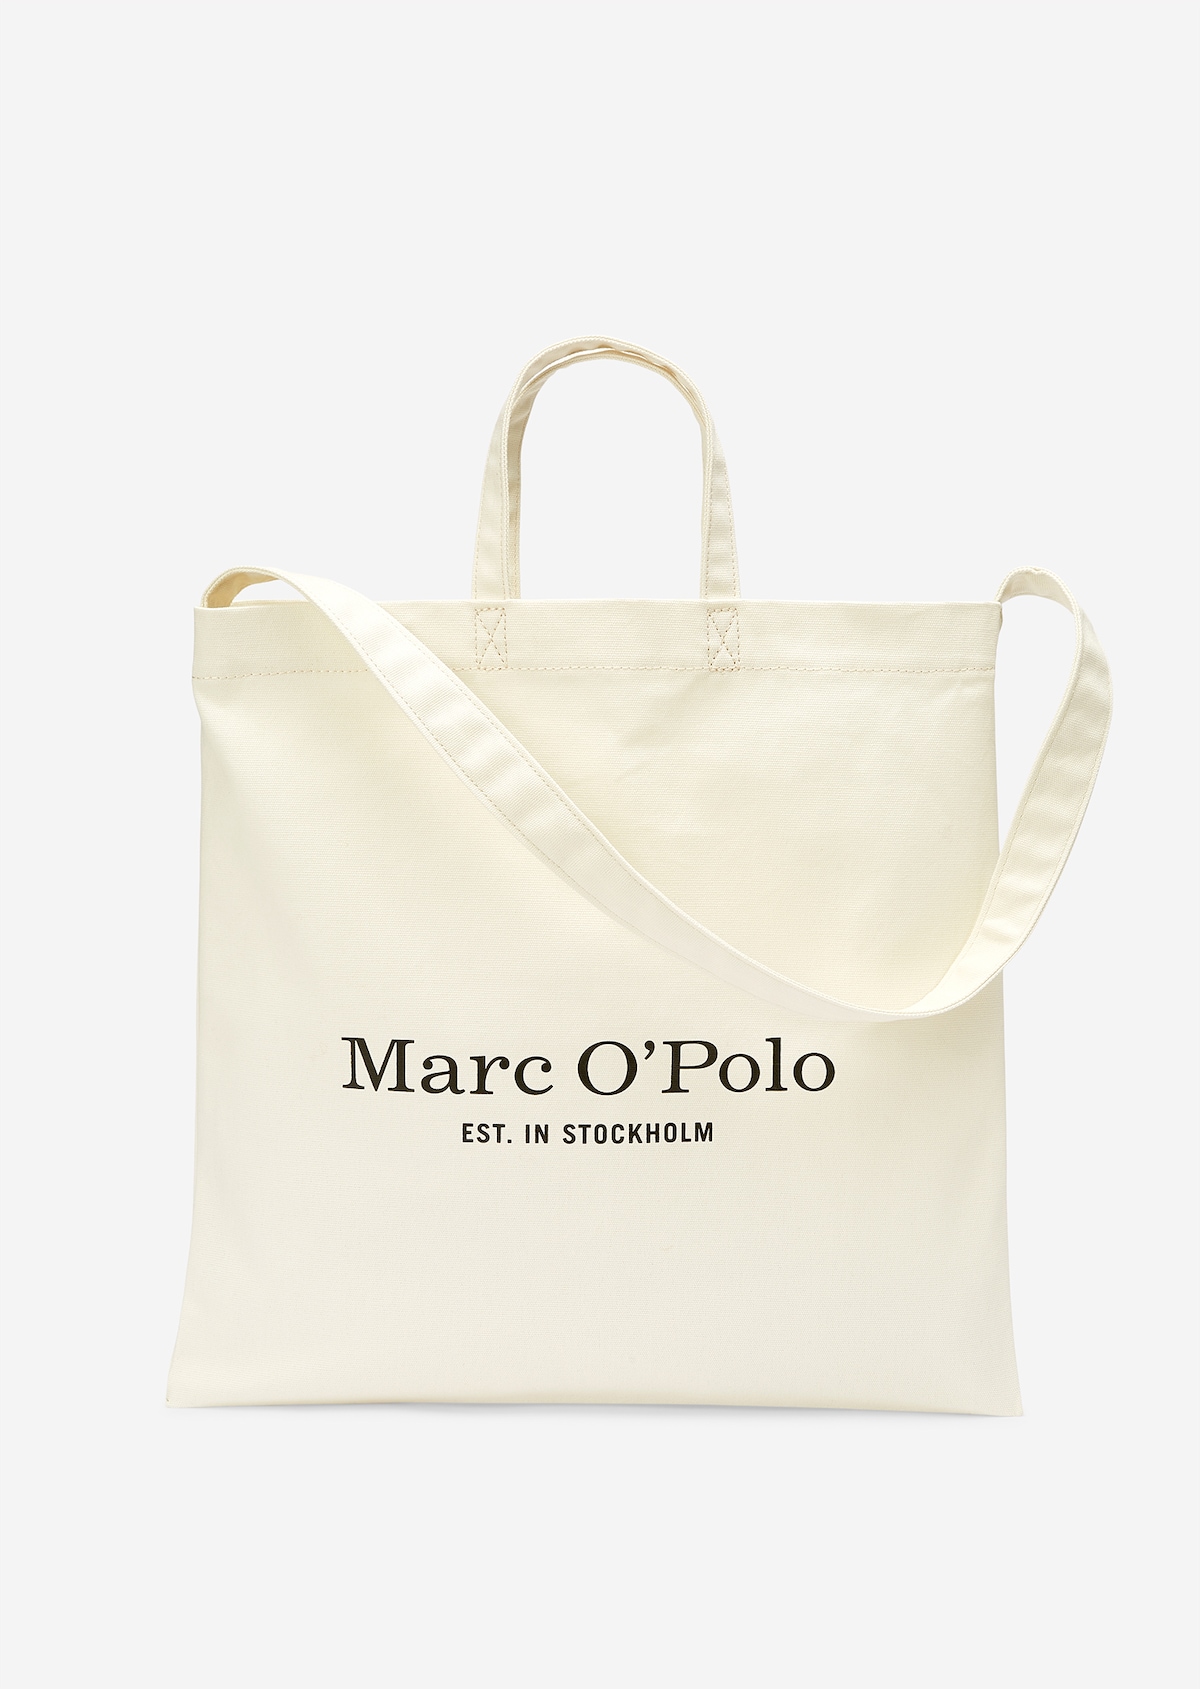 medeleerling Cadeau Respect Shopper made of robust organic cotton fabric - white | Accessories | MARC O' POLO